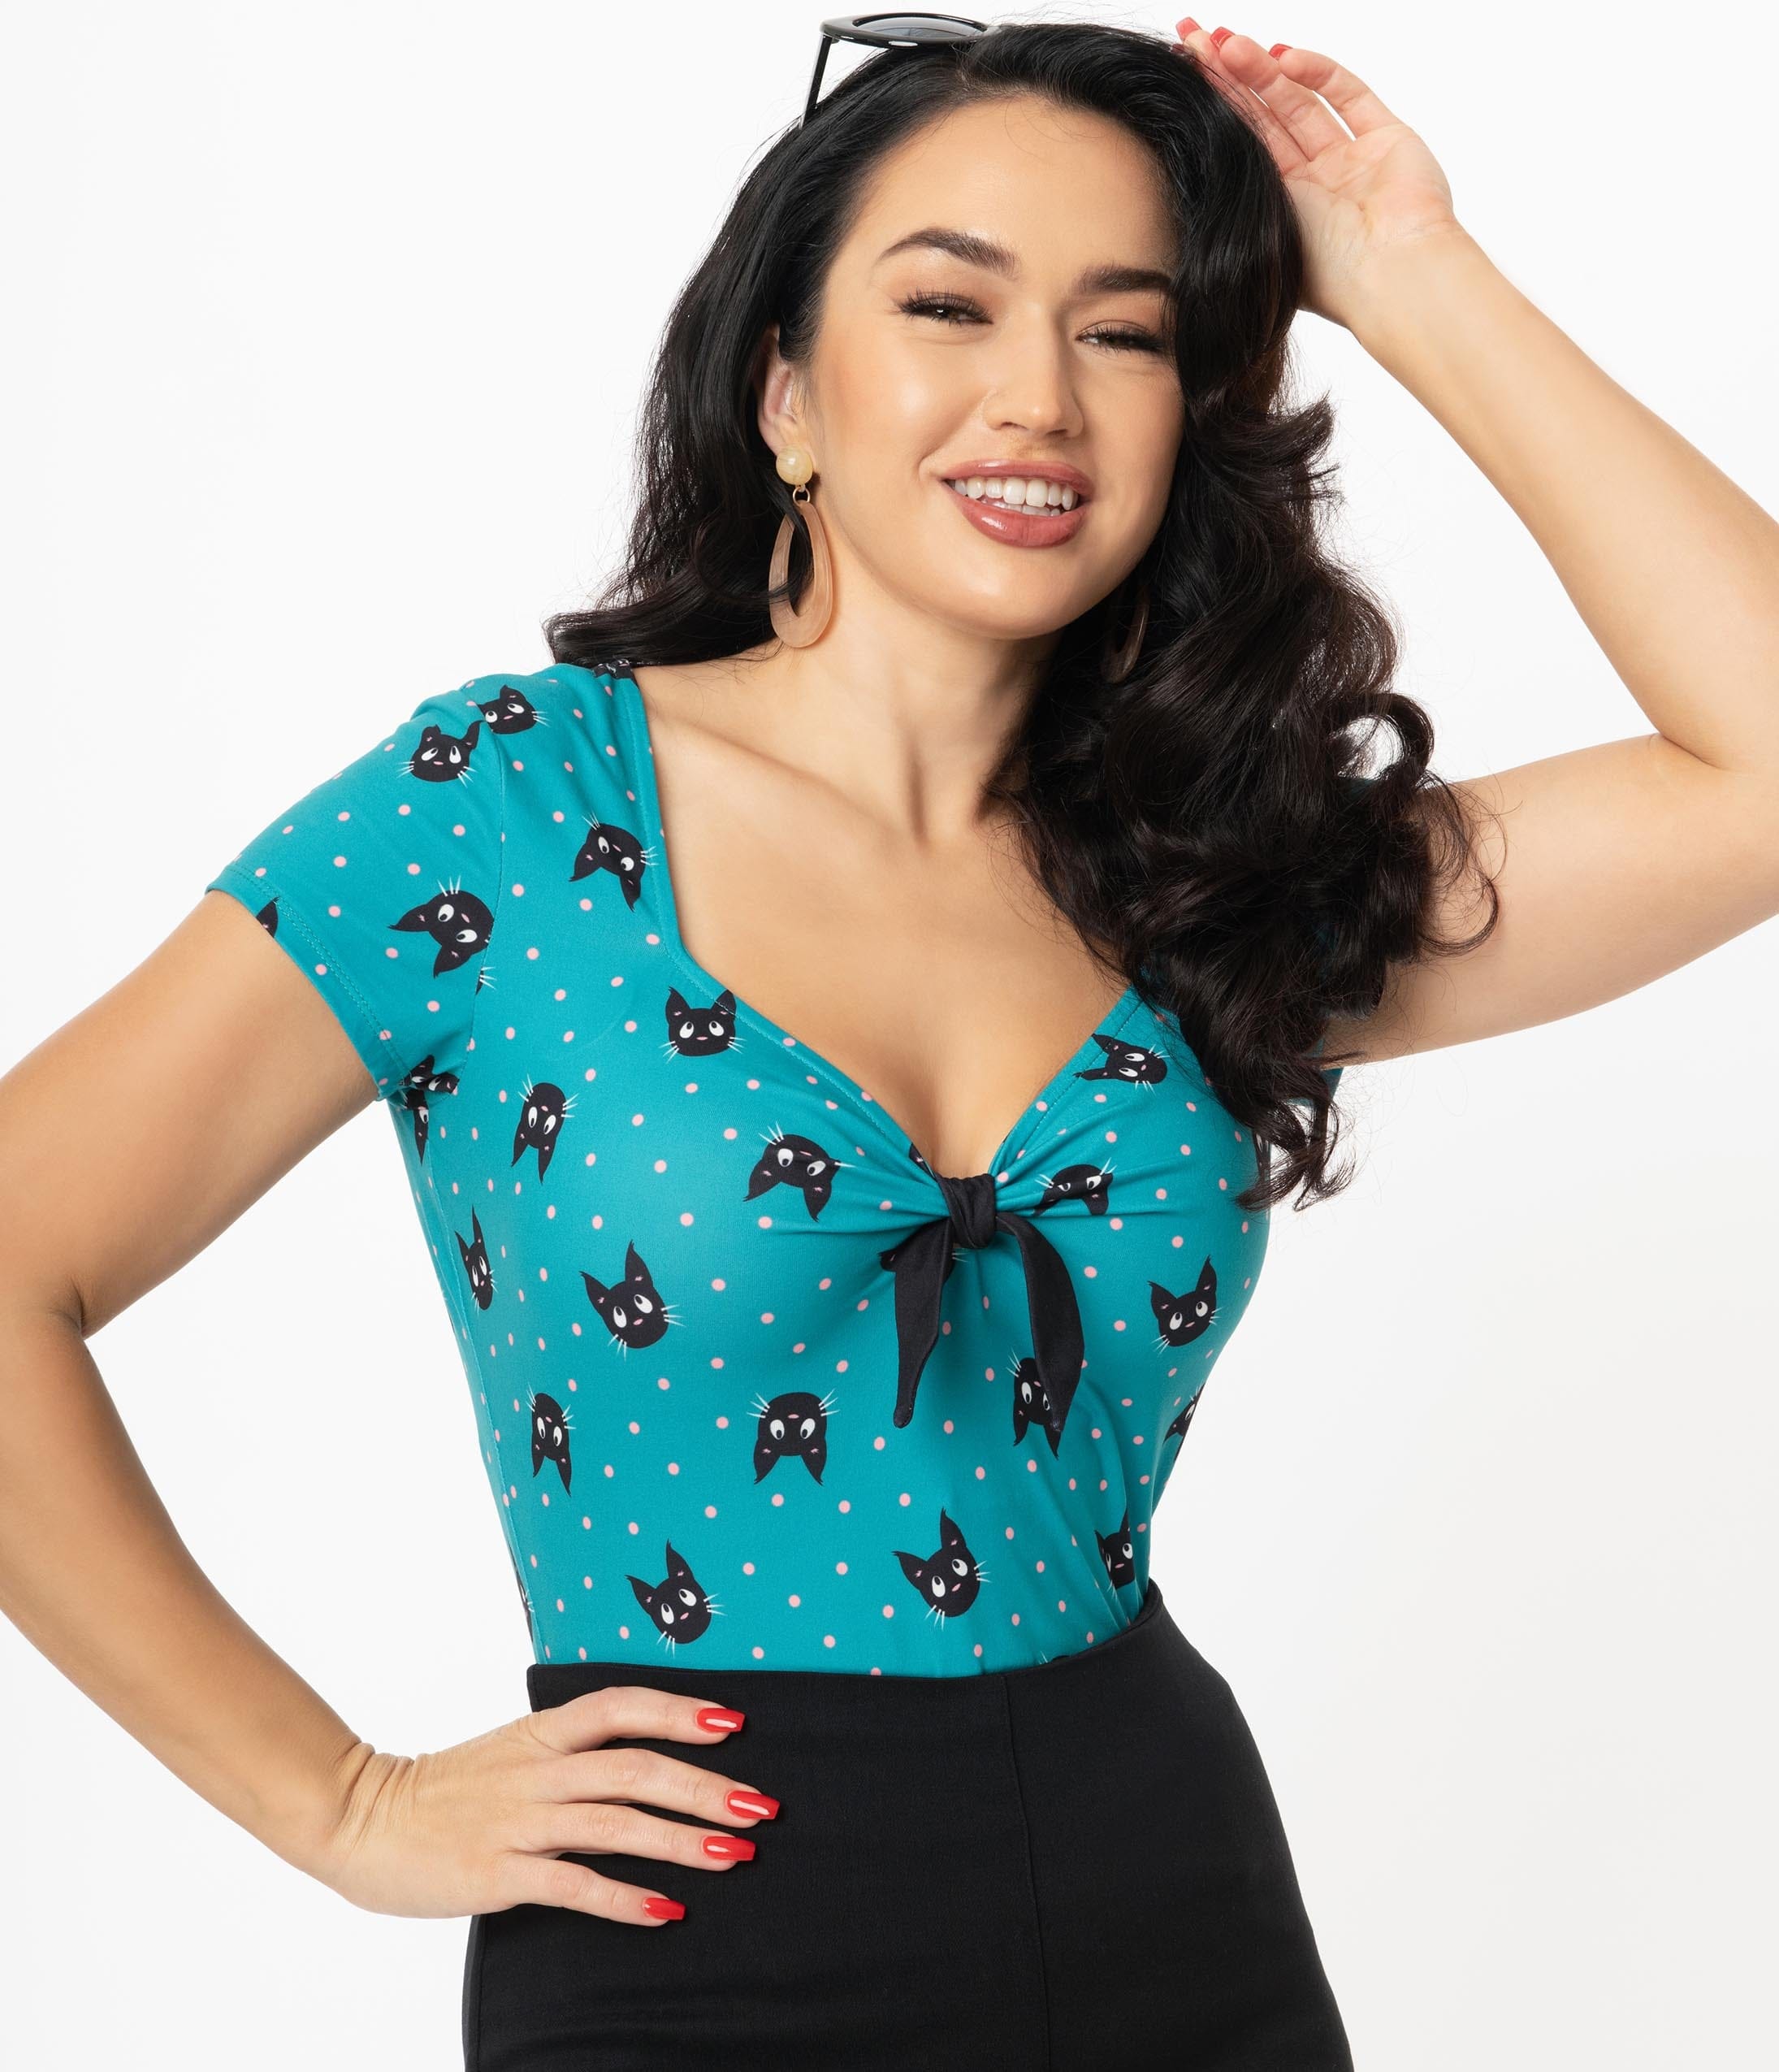 

Unique Vintage Teal & Black Cat Print Sweetheart Rosemary Top